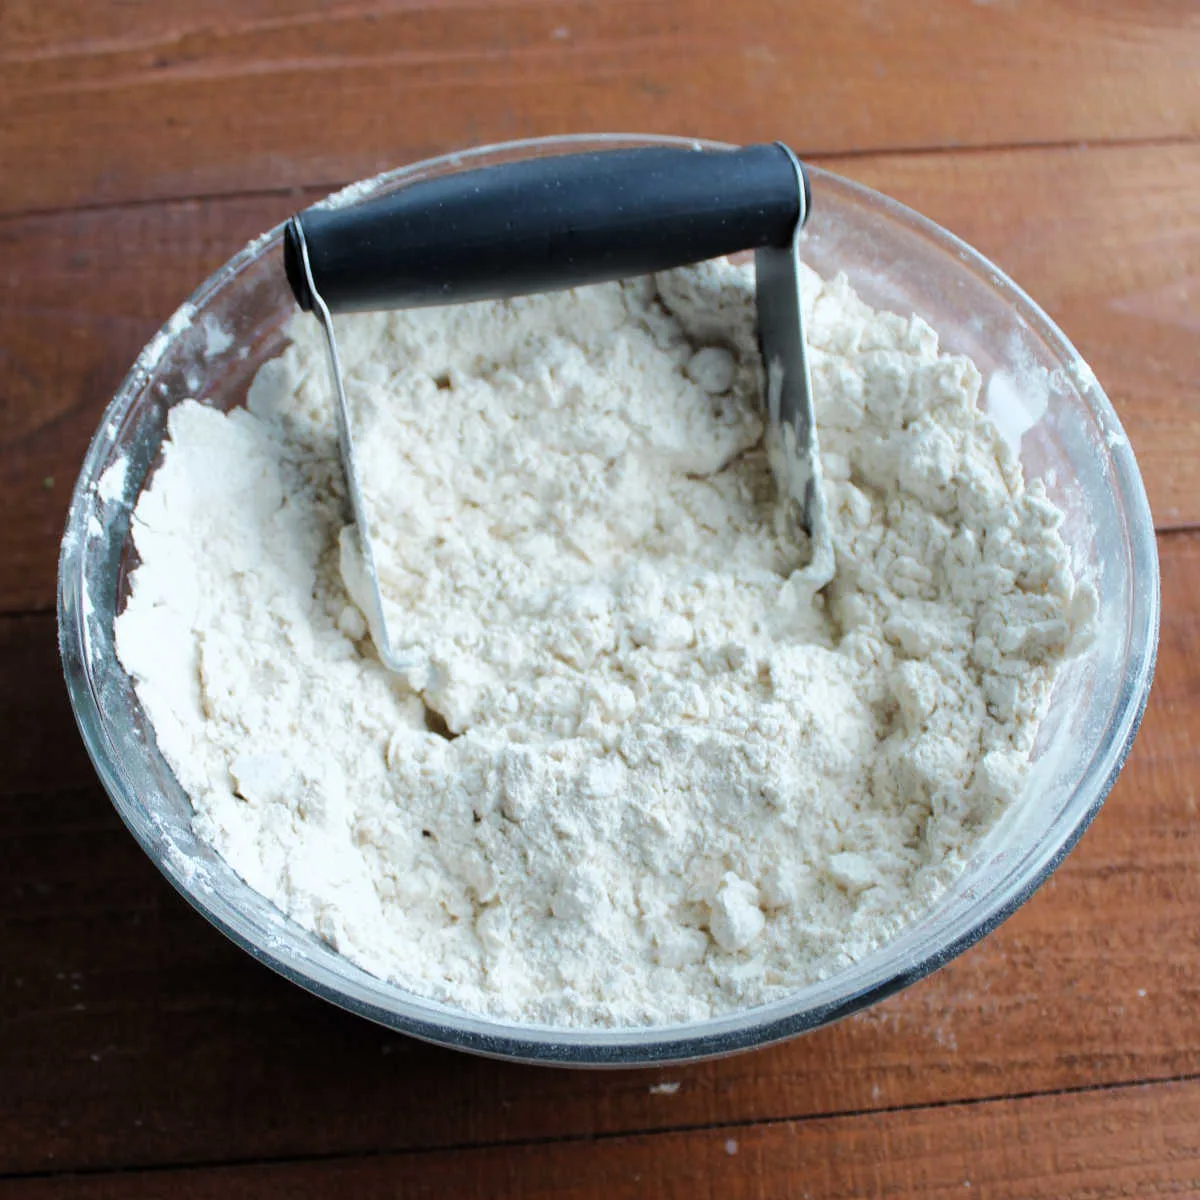 Mixing bowl of flour with lard cut into it with a pastry cutter, showing crumbly texture.